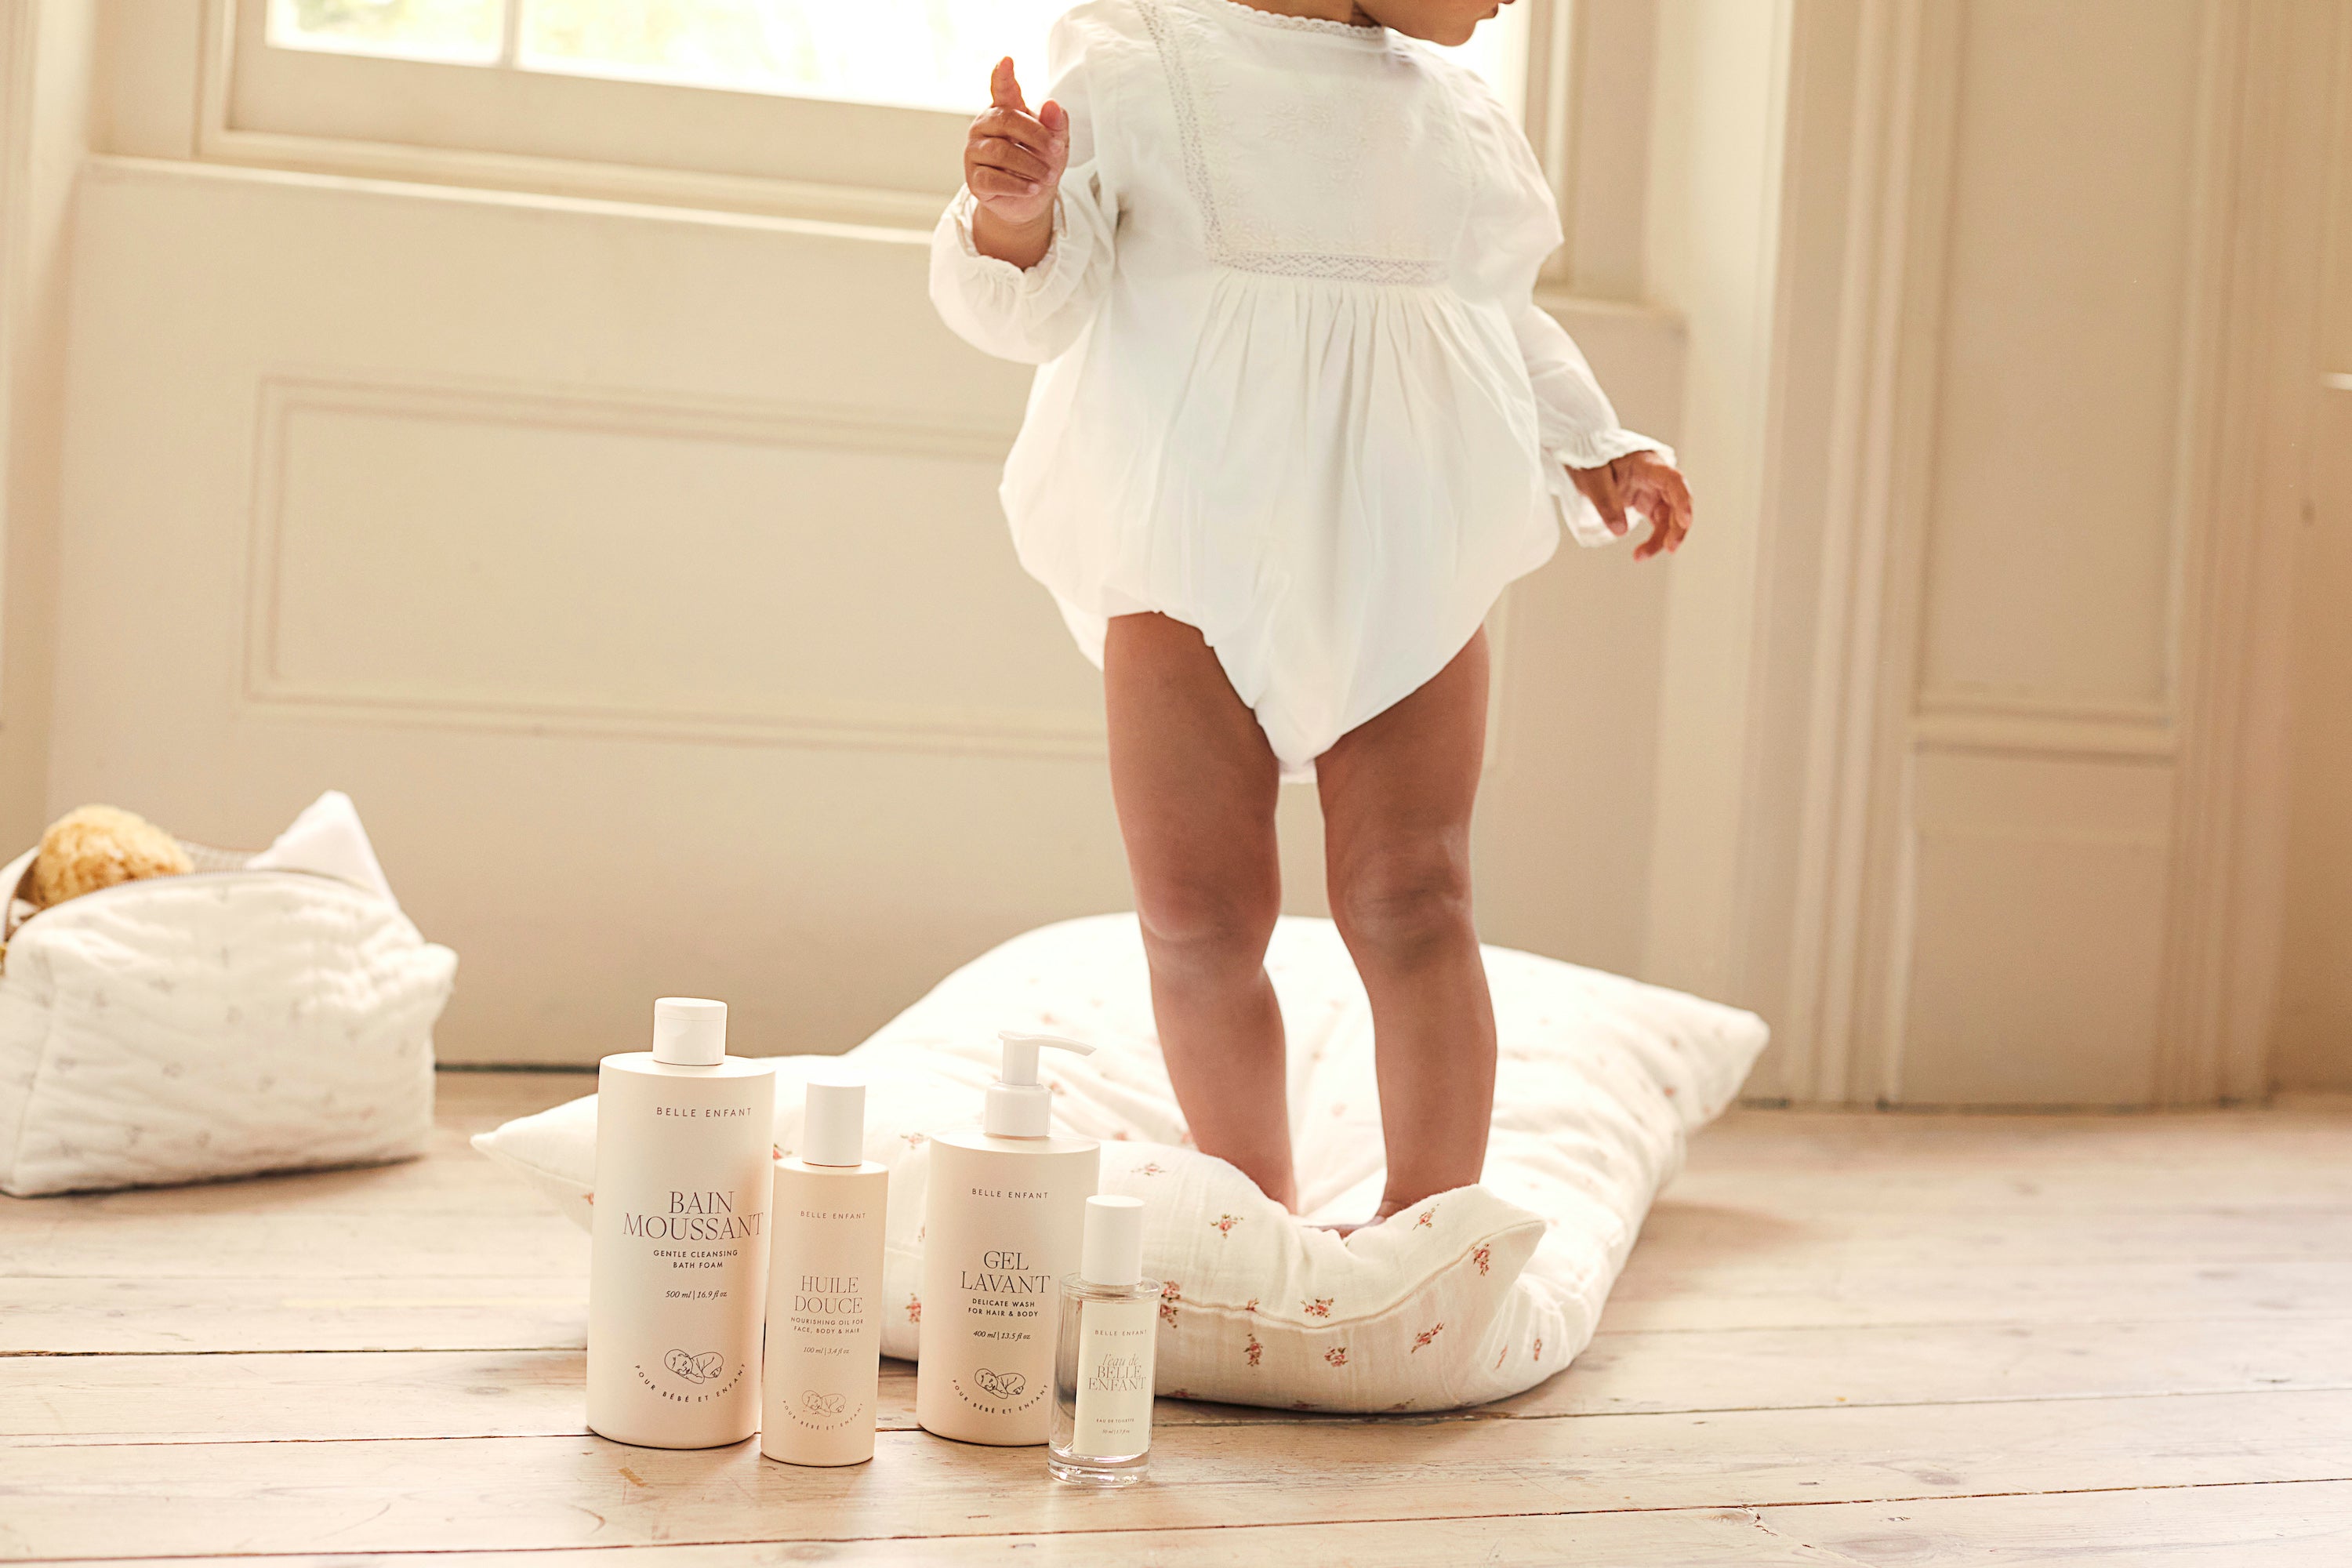 The Deluxe Baby Bath & Skincare Set